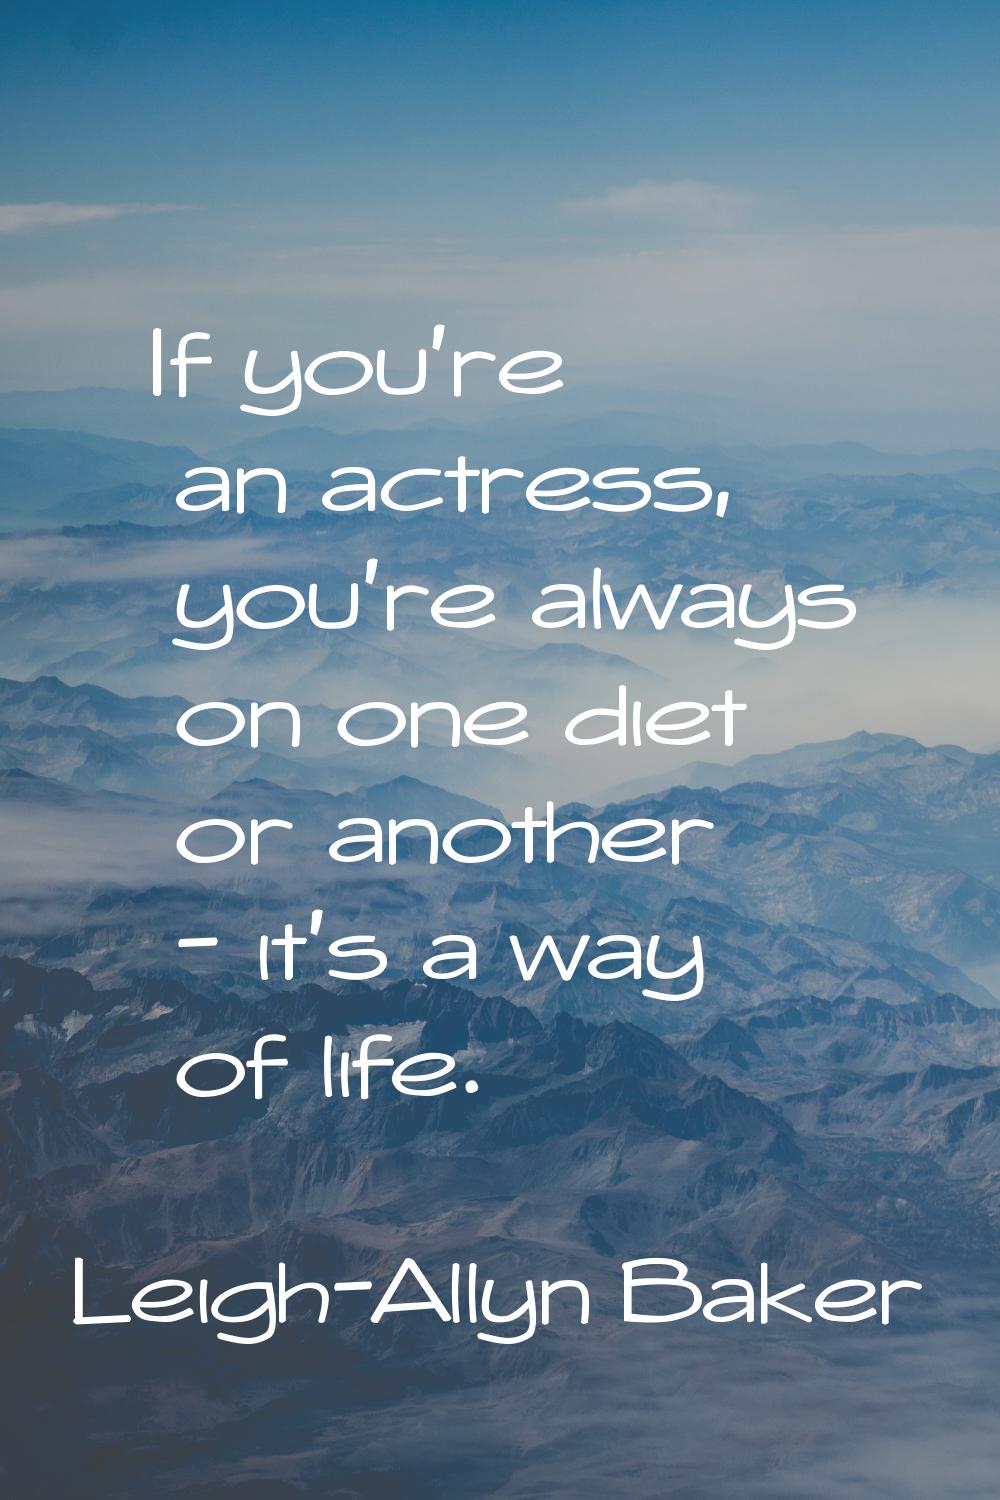 If you're an actress, you're always on one diet or another - it's a way of life.